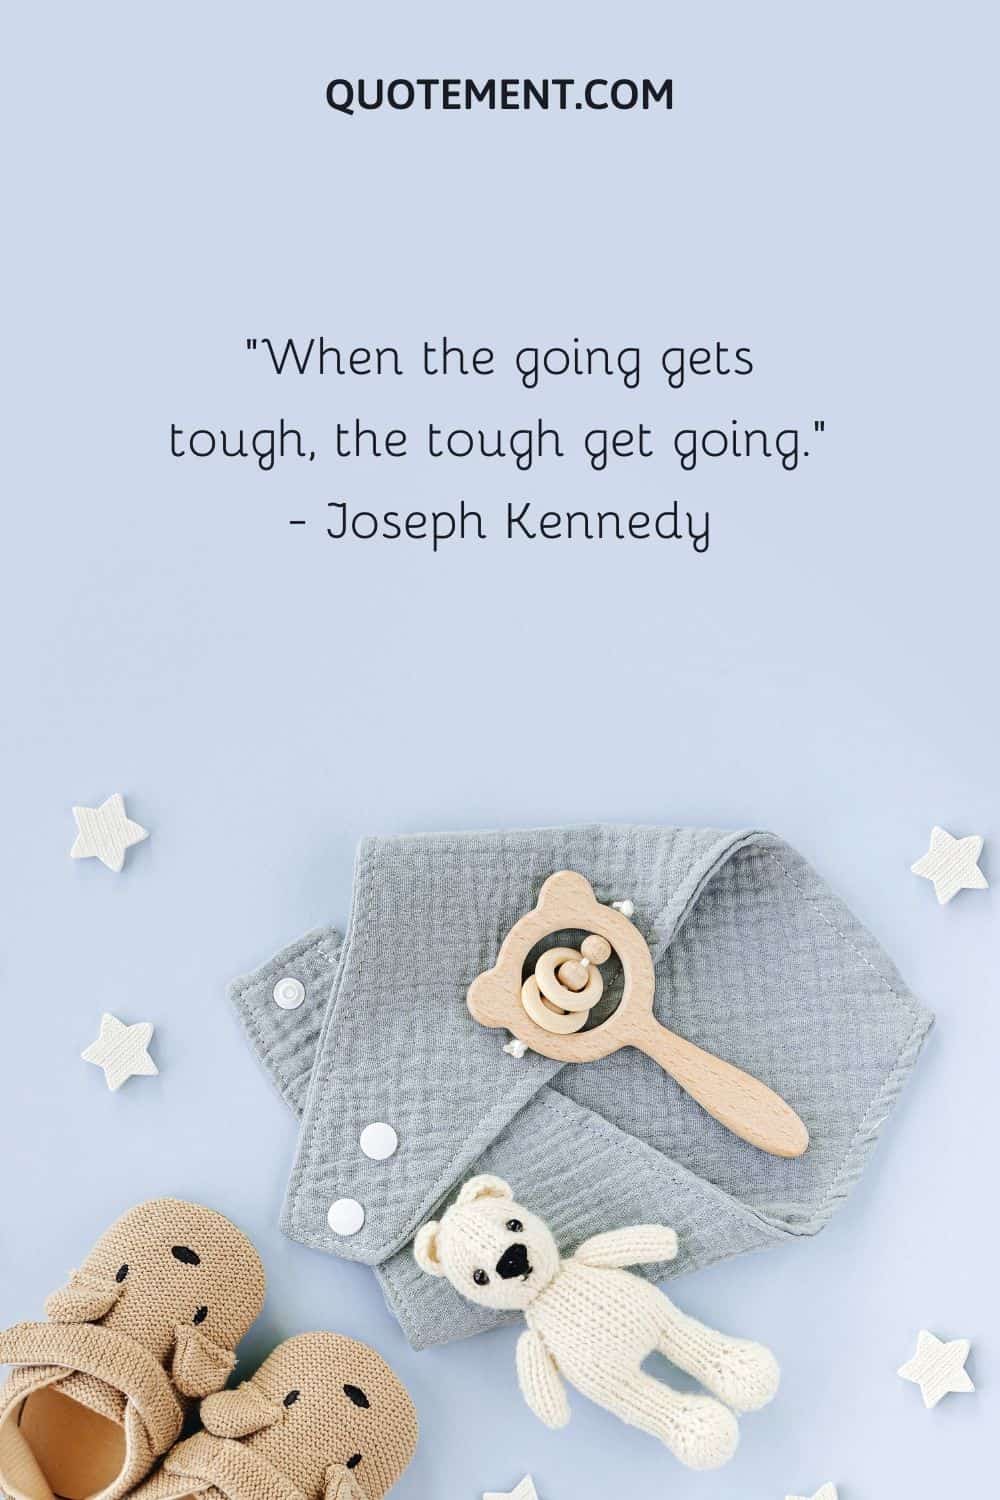 When the going gets tough, the tough get going.